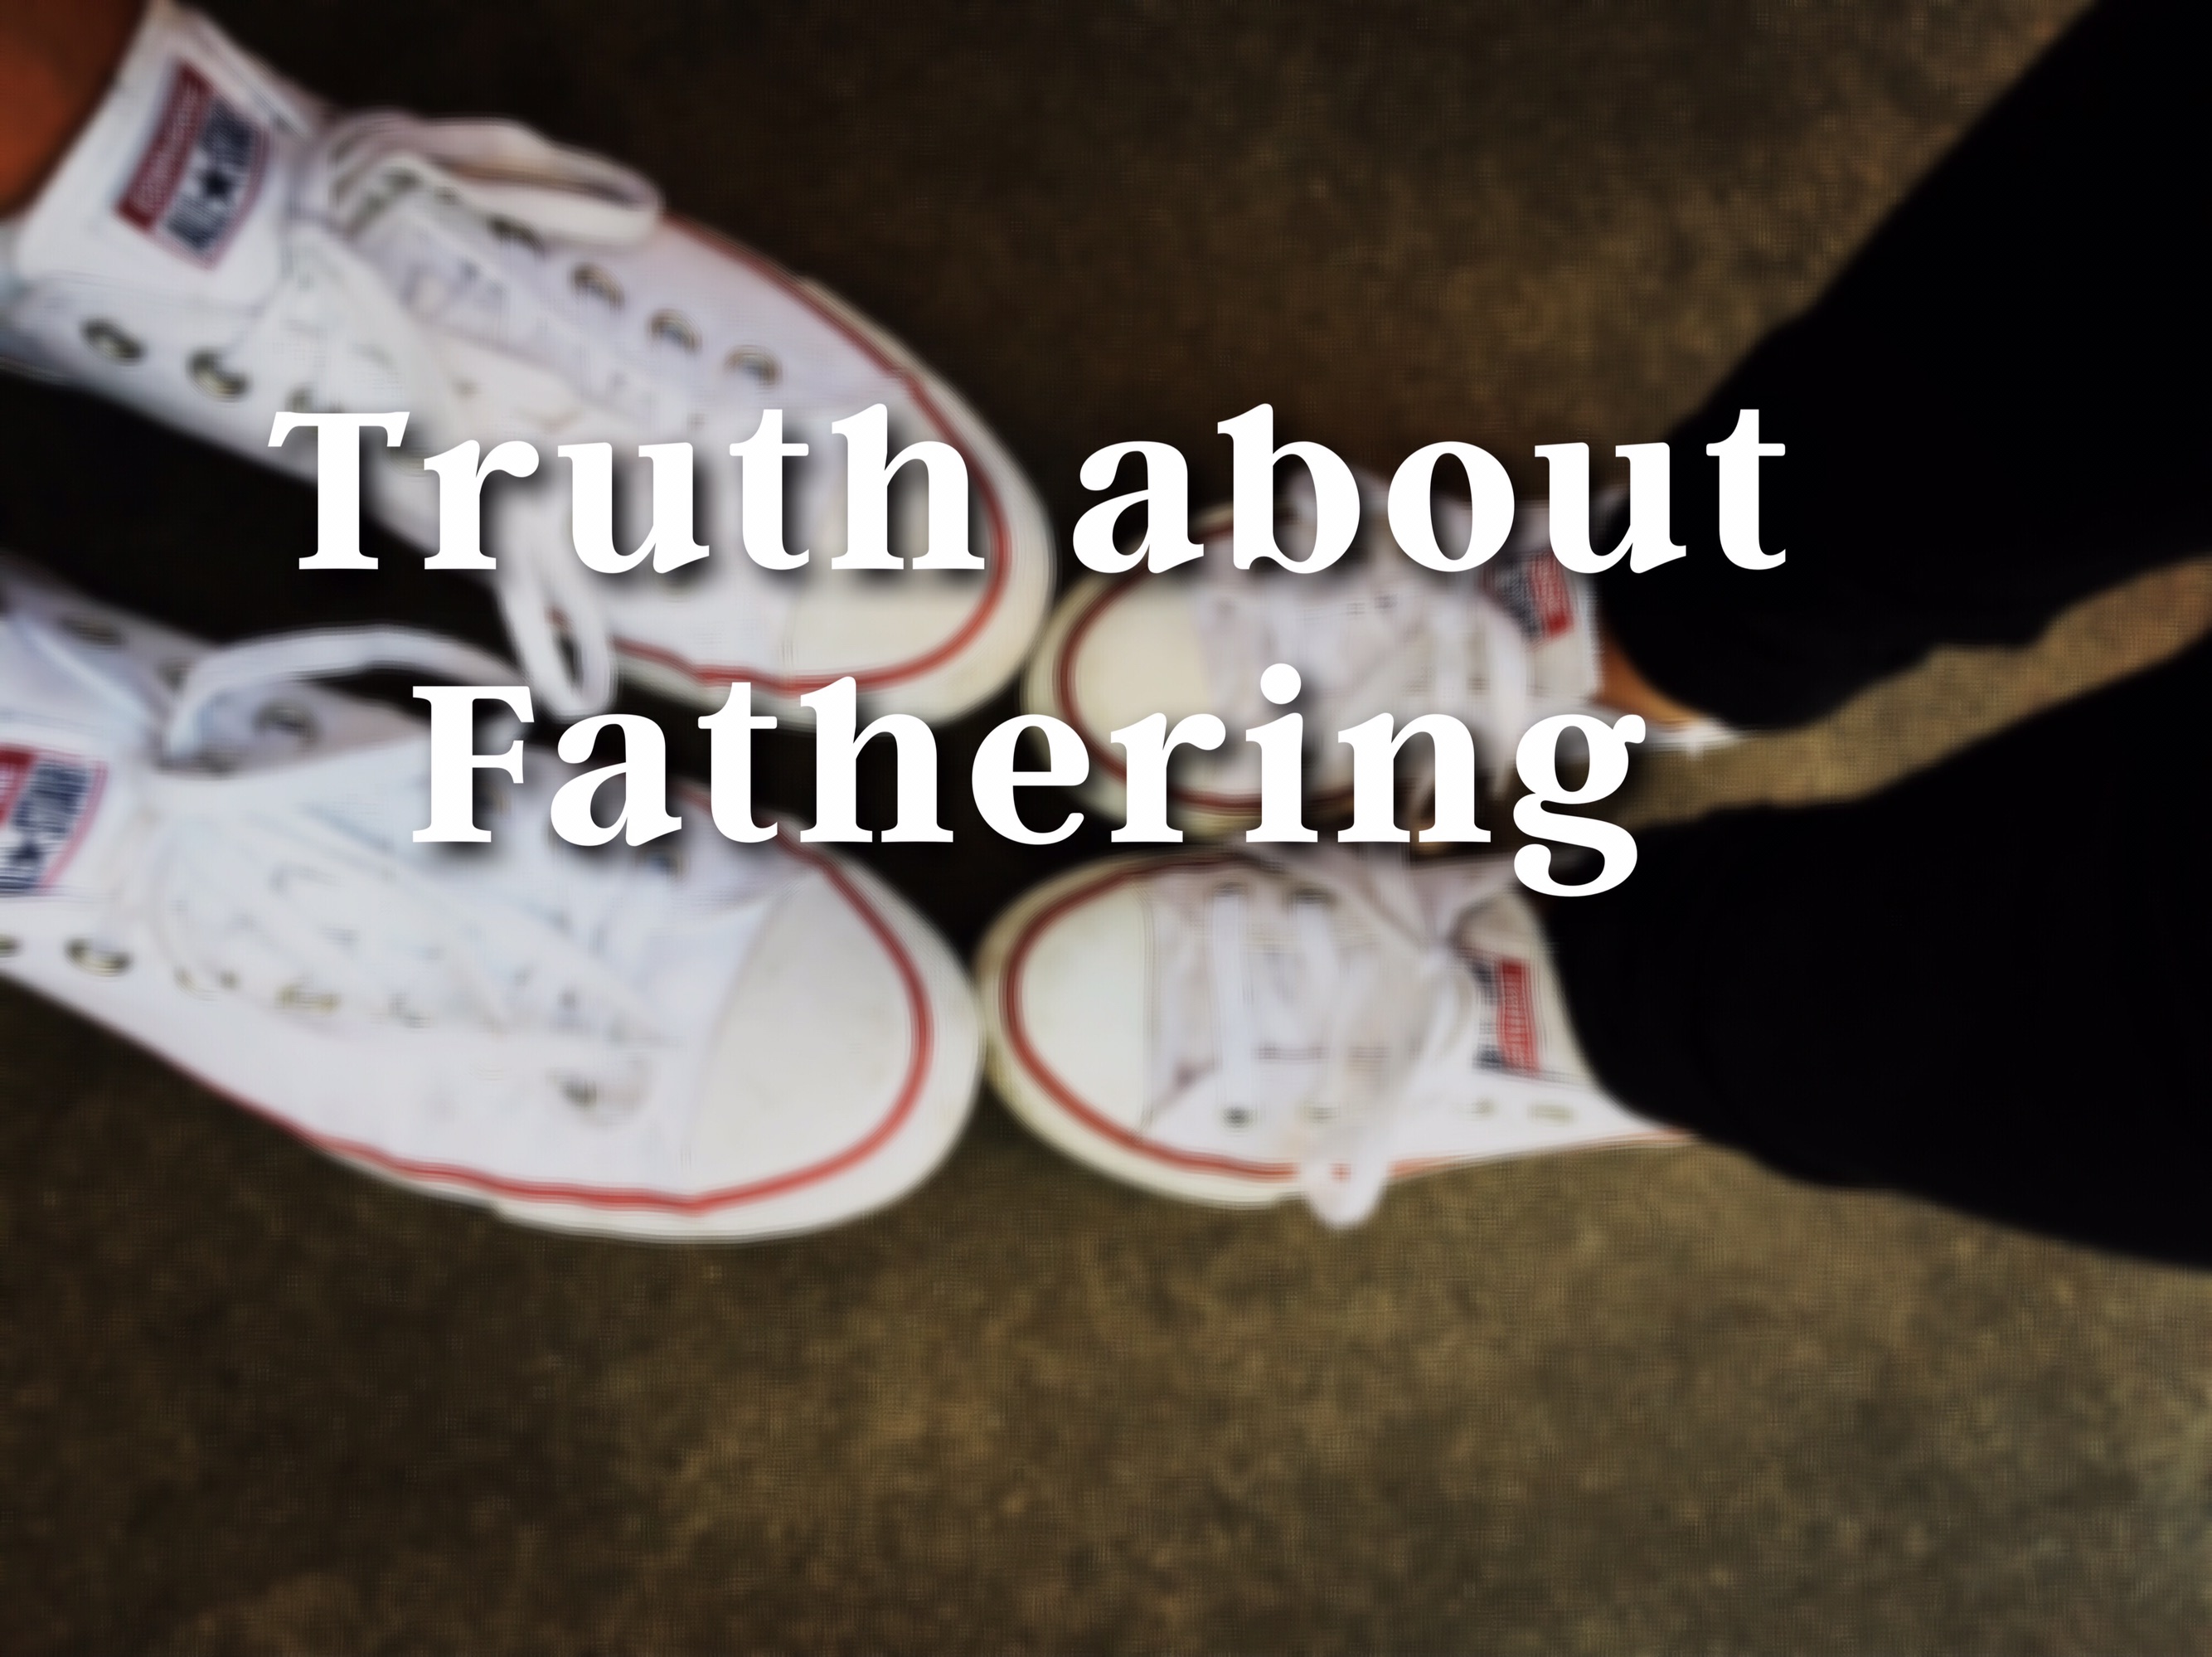 Truth About Fathering, Podcast about fathering and how God fathers us. Episode Two: Comparison